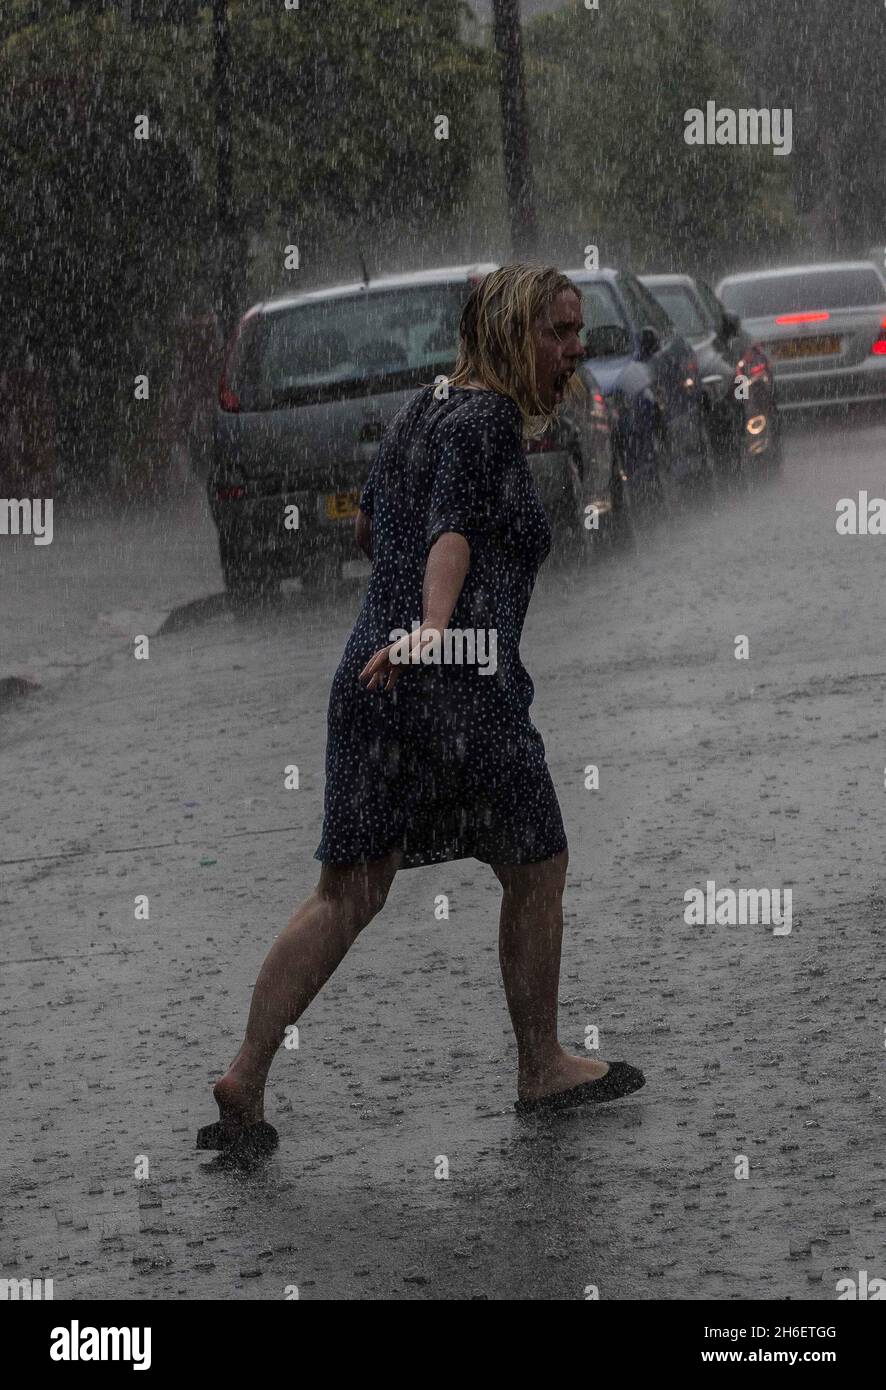 A woman gets caught in heavy rain in East London this afternoon Stock Photo